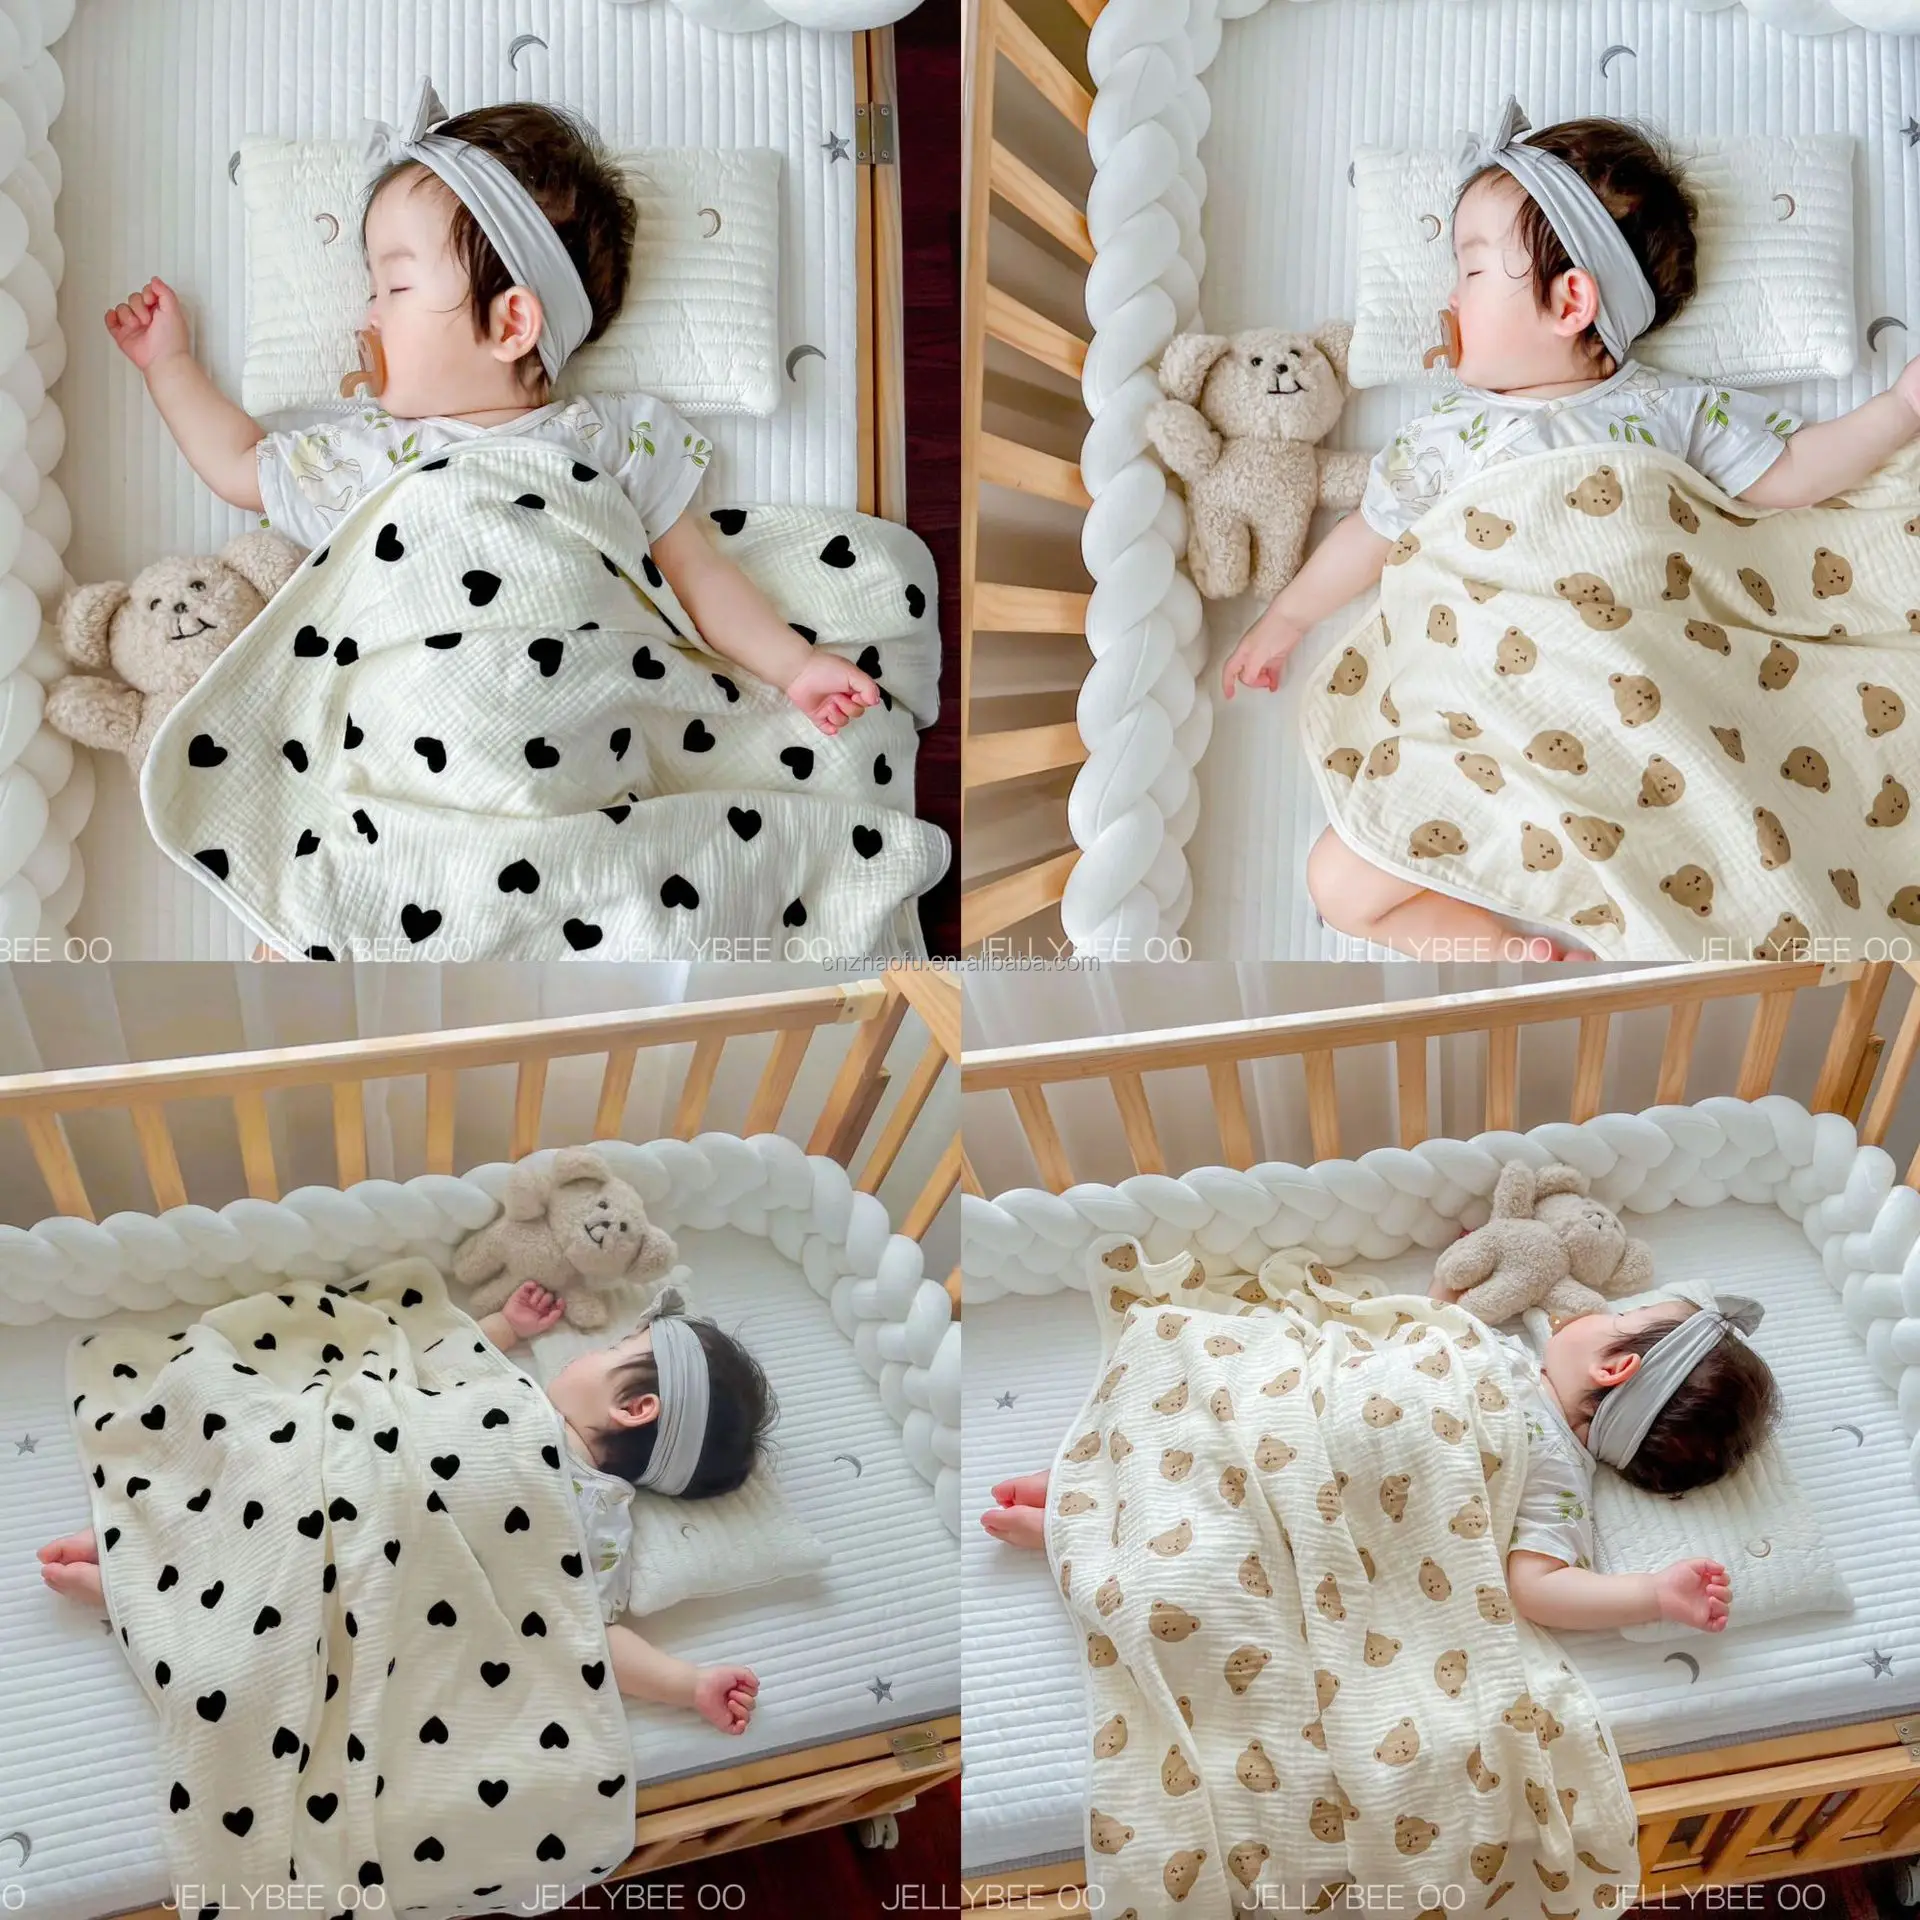 Infant Comfortable soft 4 layers bamboo cotton Newborn Towel Quilt Designs Baby Muslin Swaddle Blankets